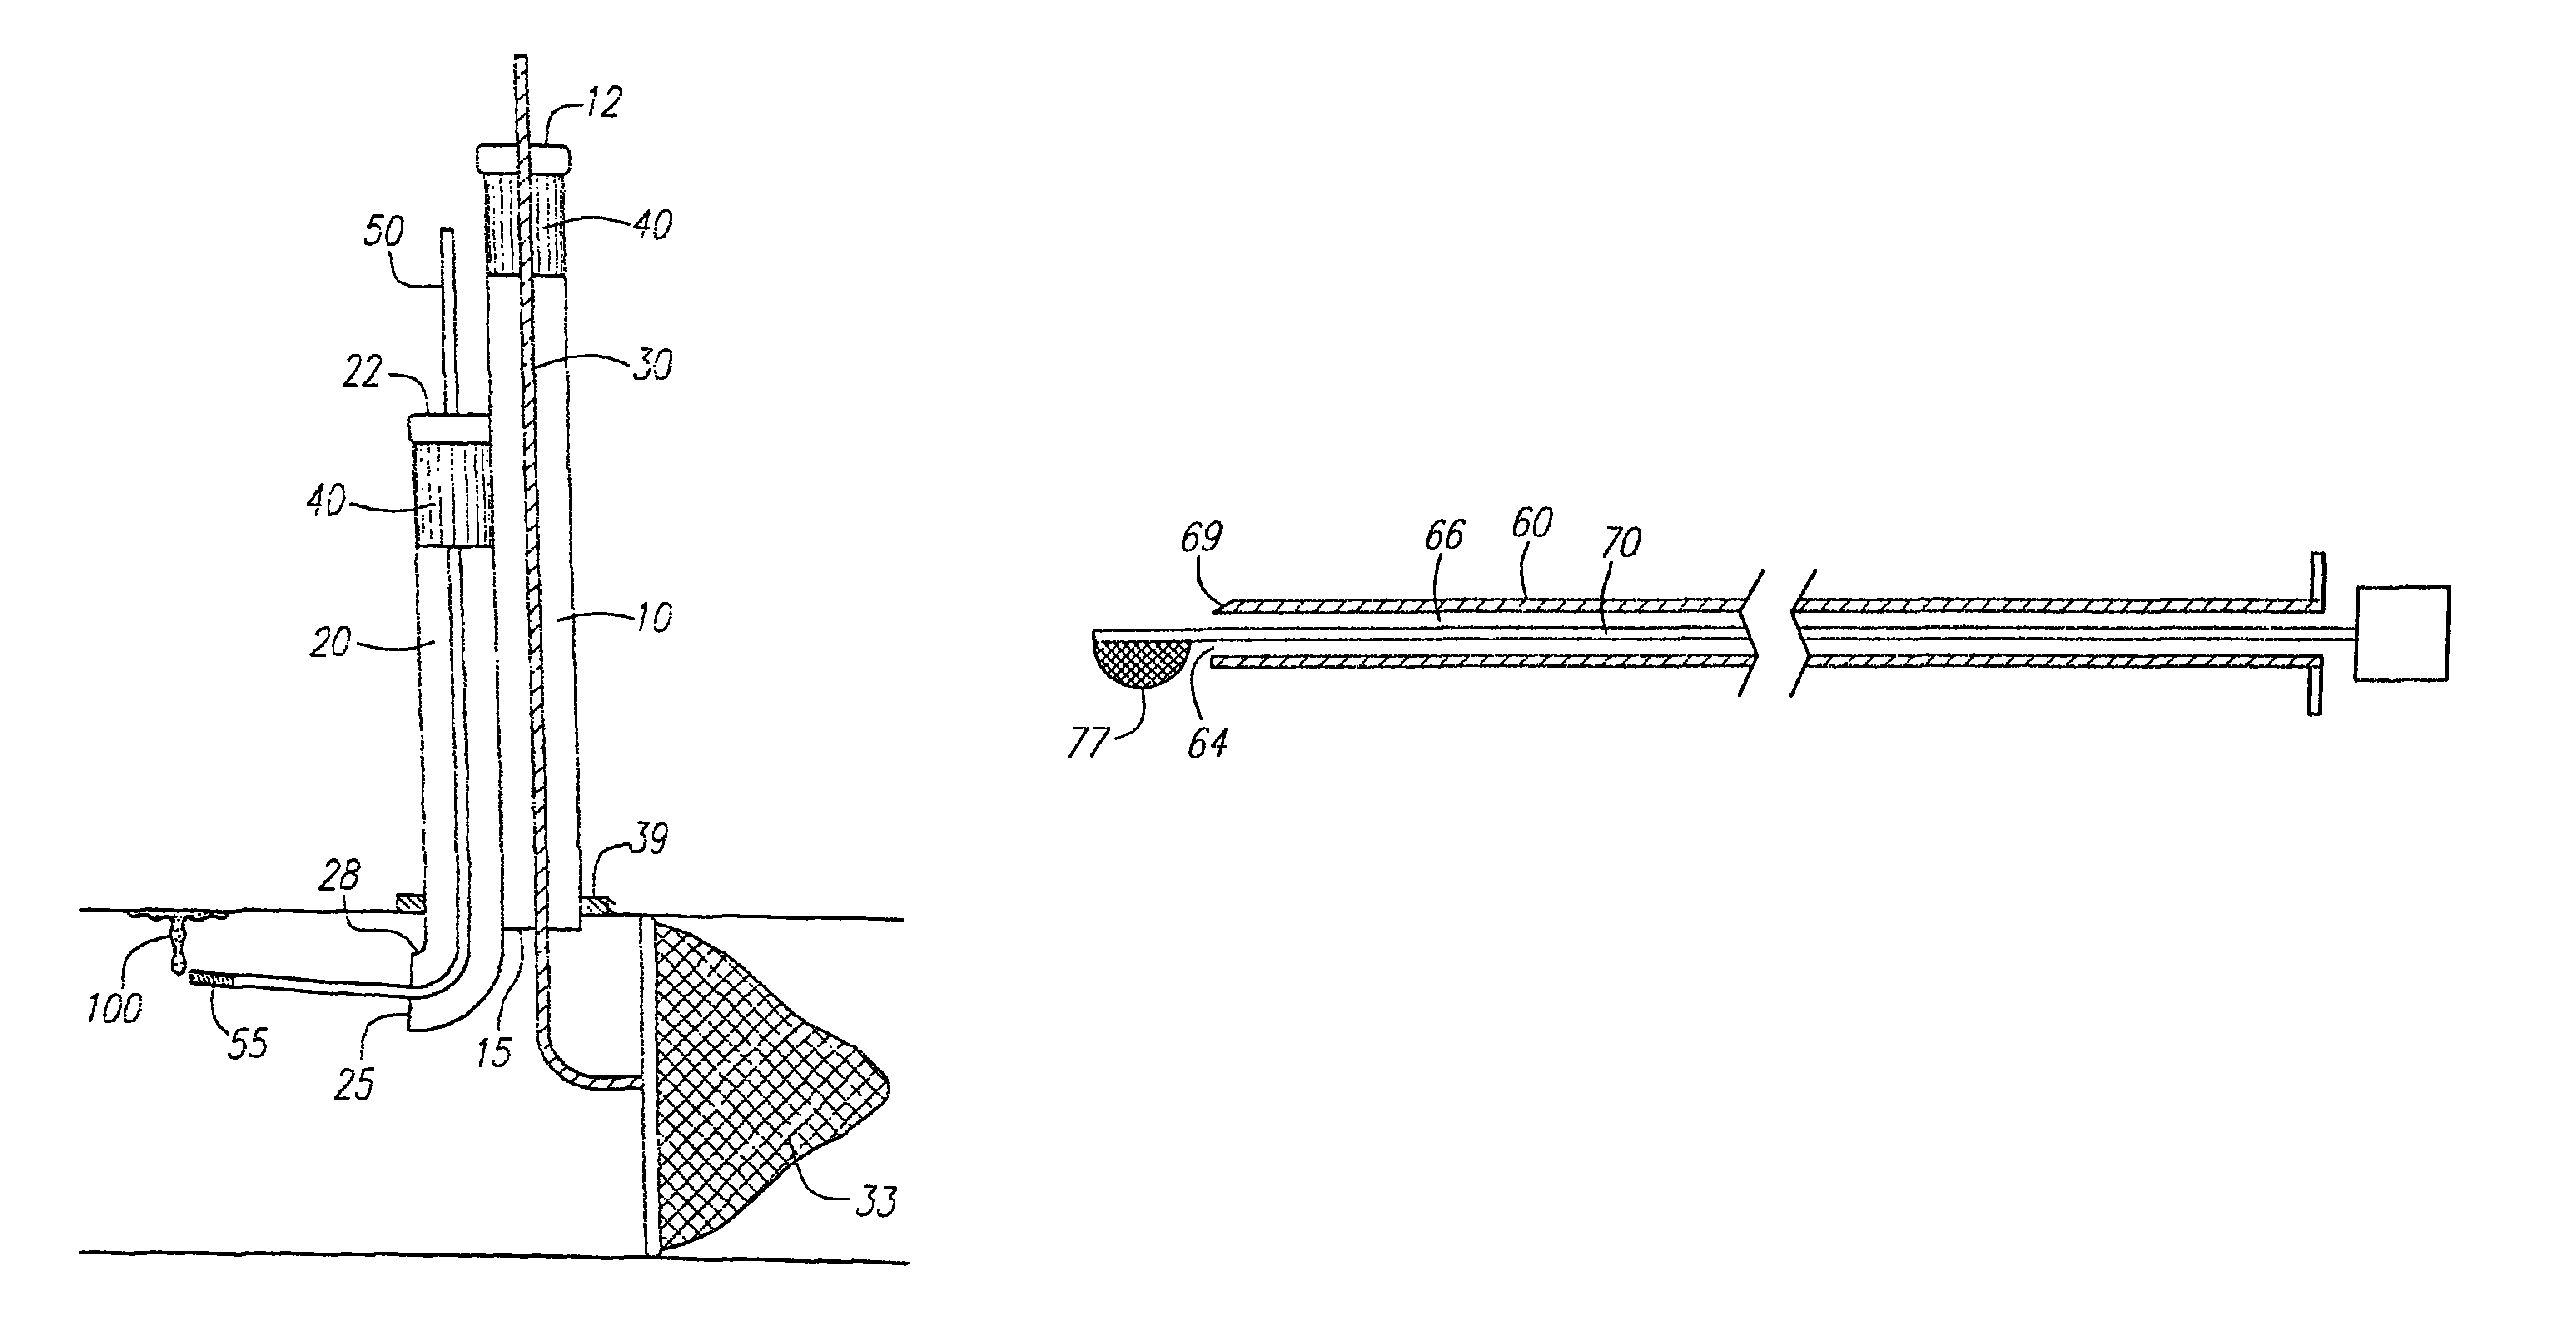 Direct access atherectomy devices and methods of use